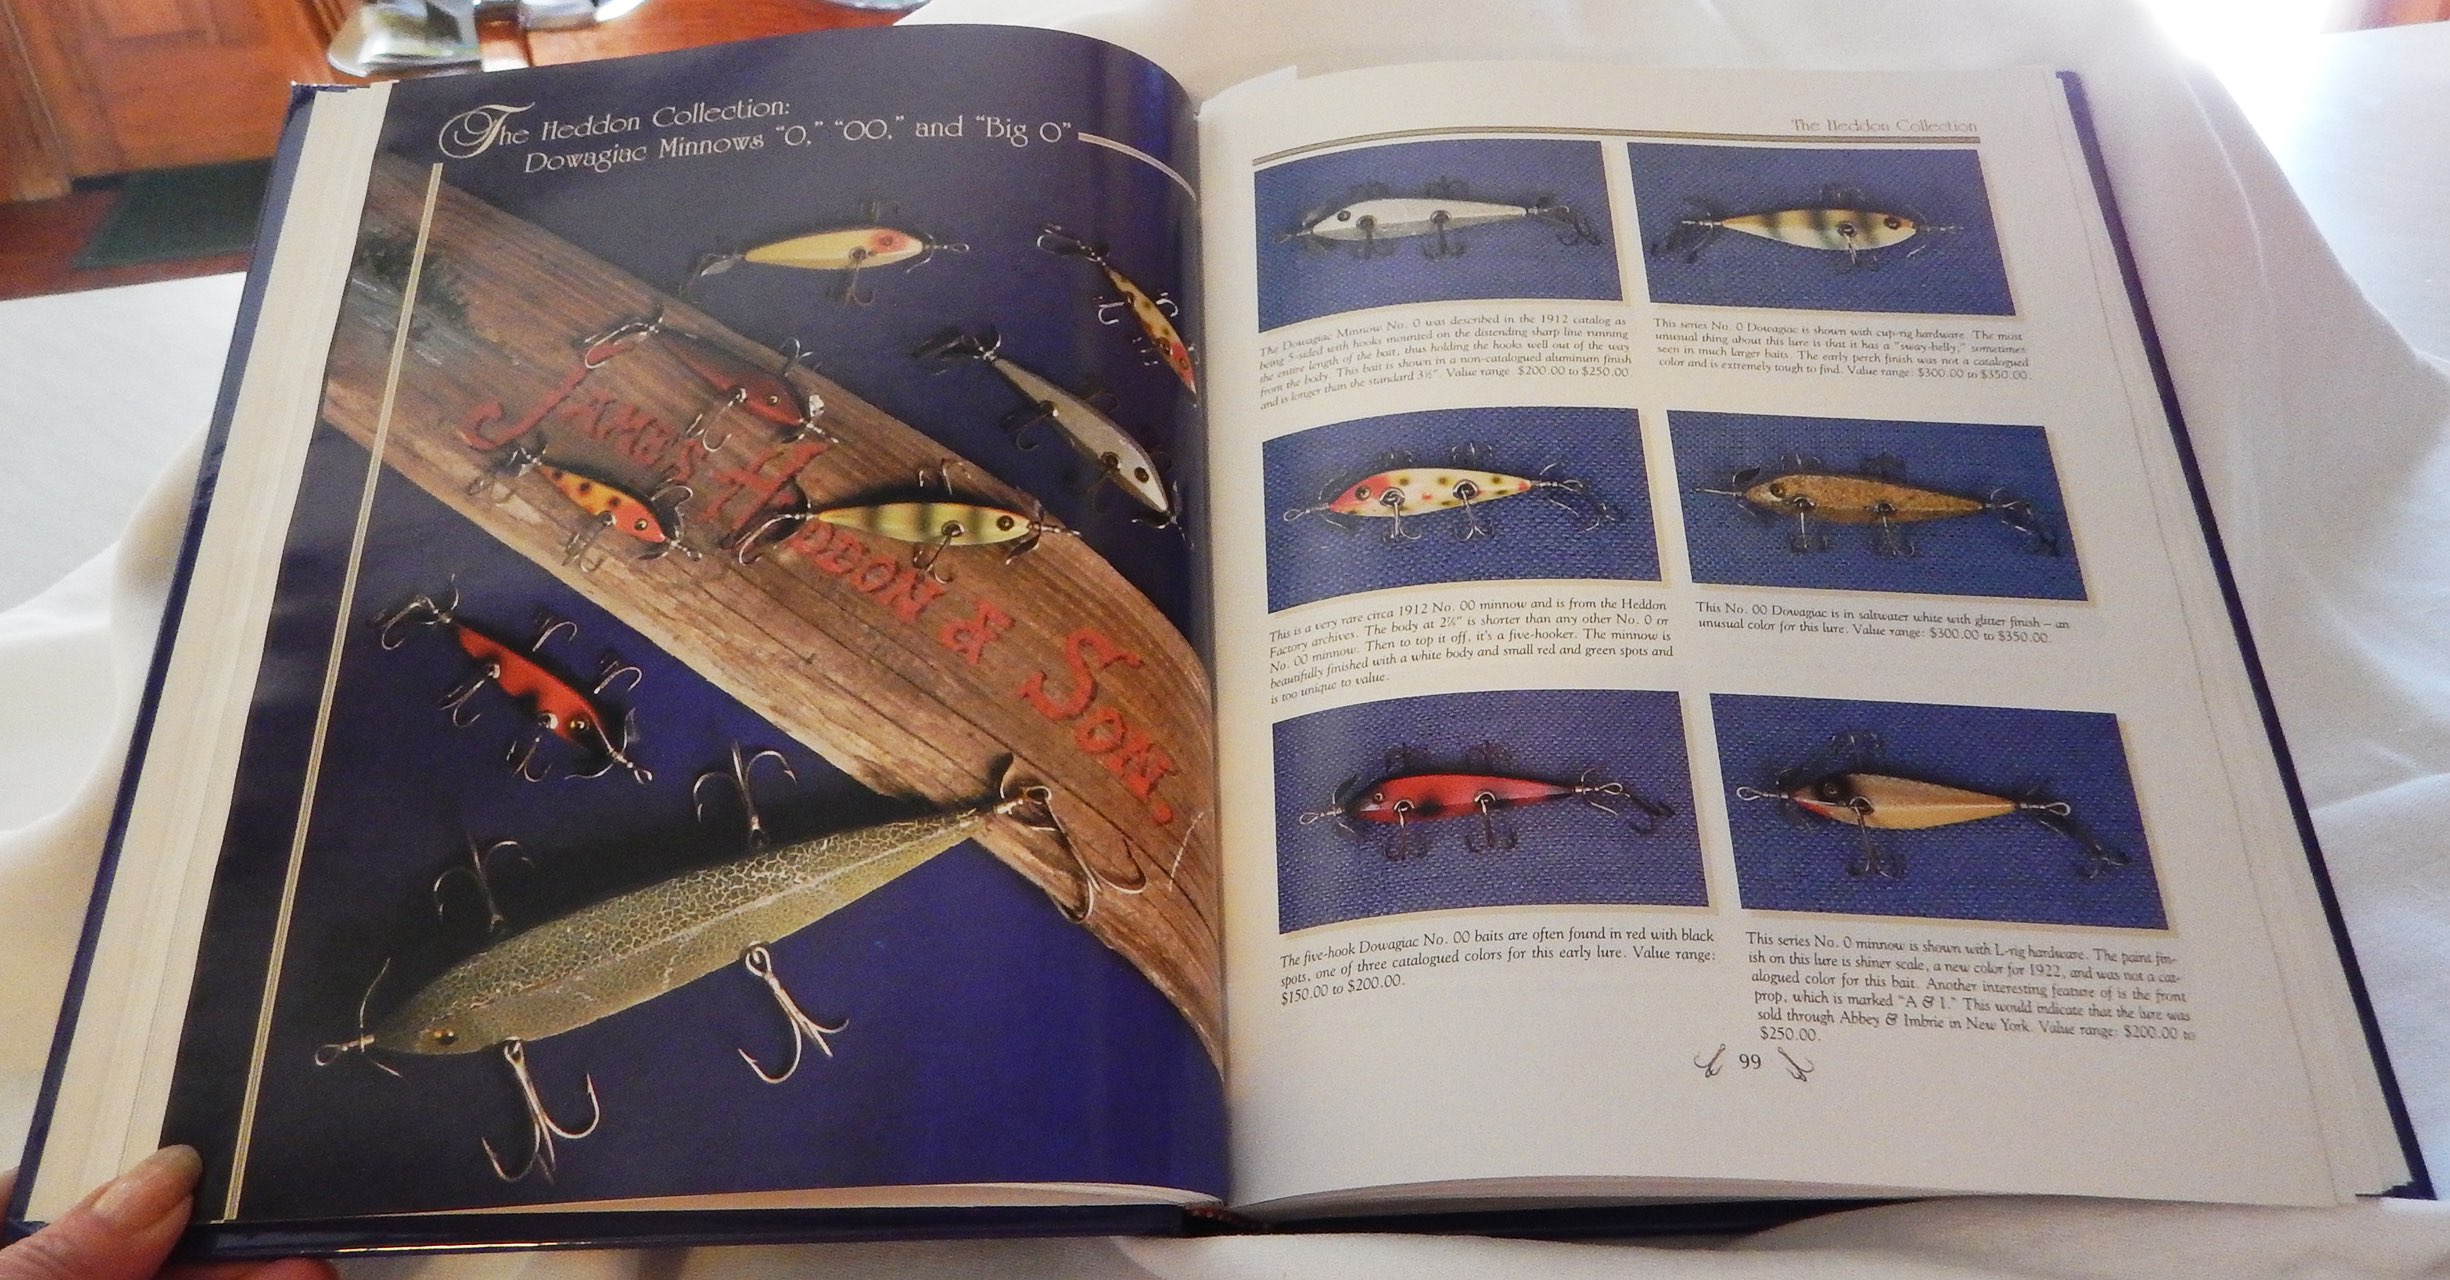 THE HEDDON LEGACY – A Century of Classic Lures